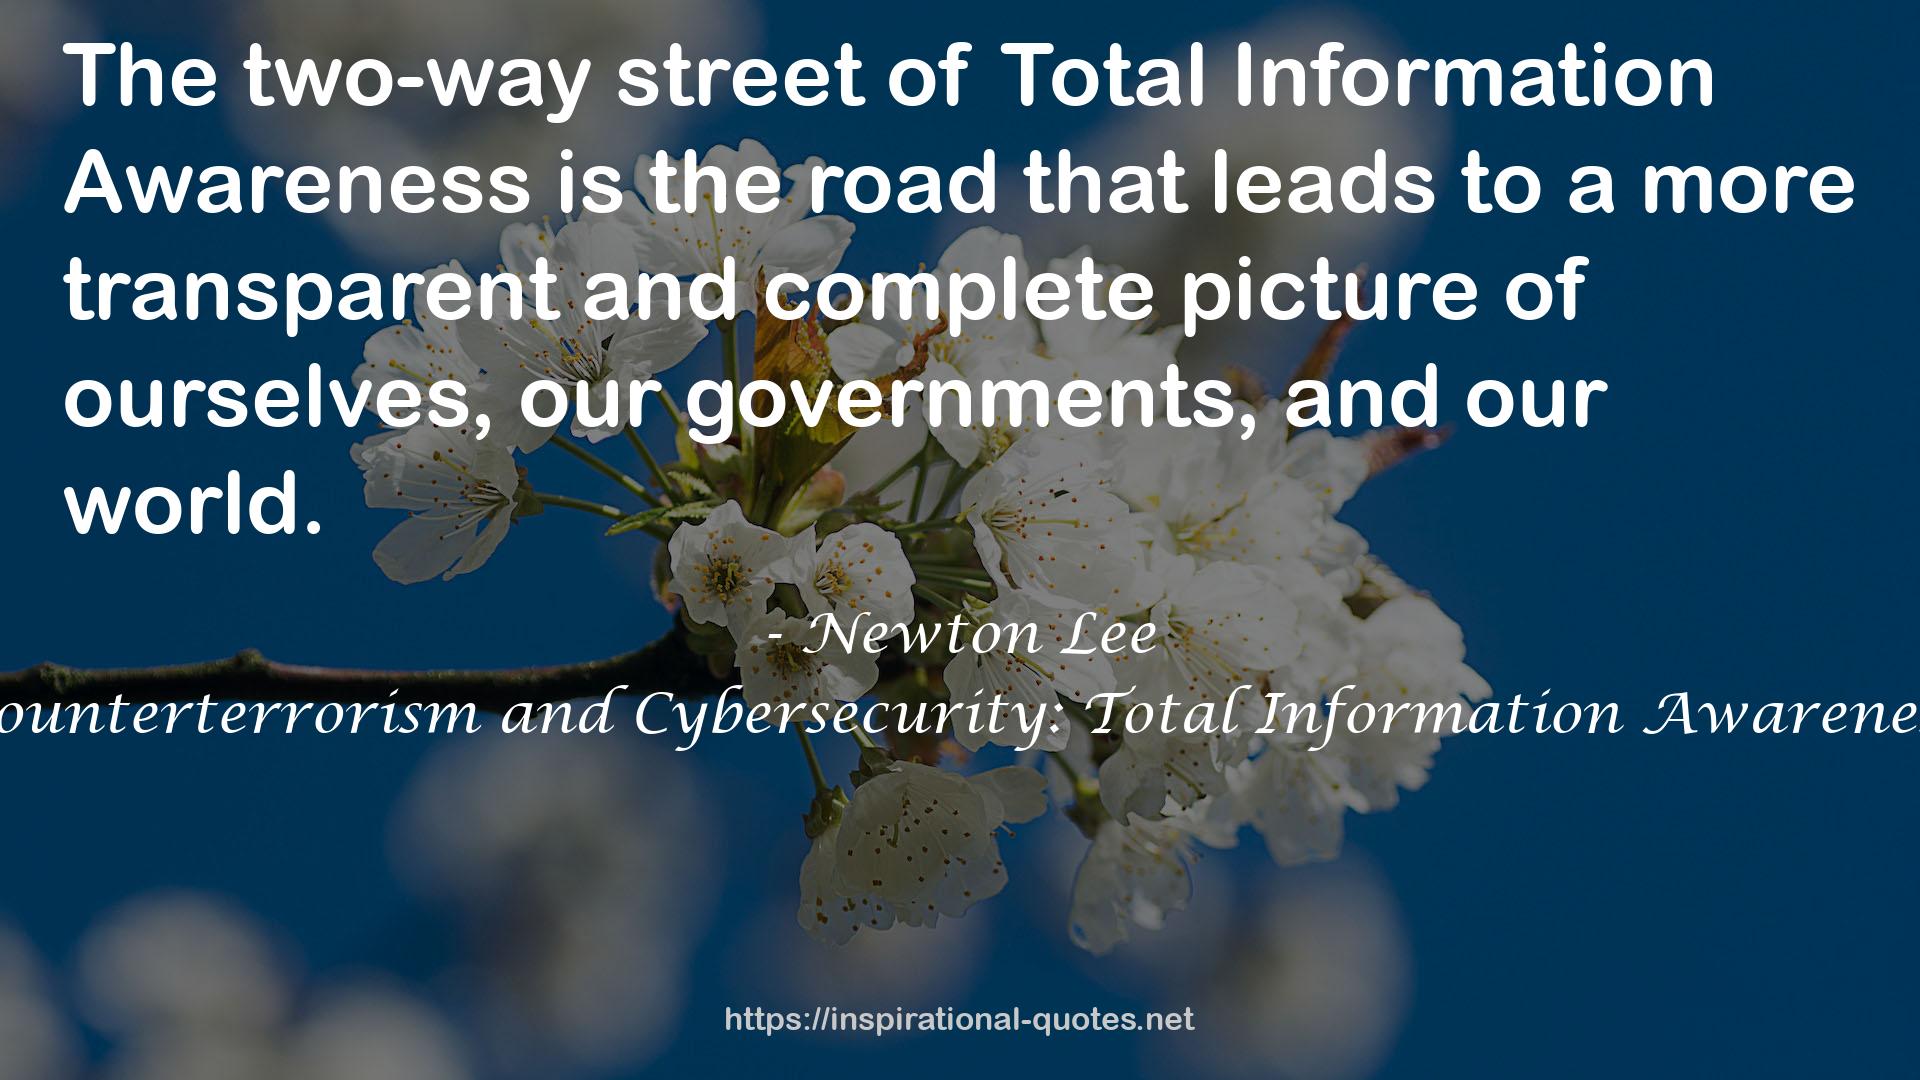 Counterterrorism and Cybersecurity: Total Information Awareness QUOTES